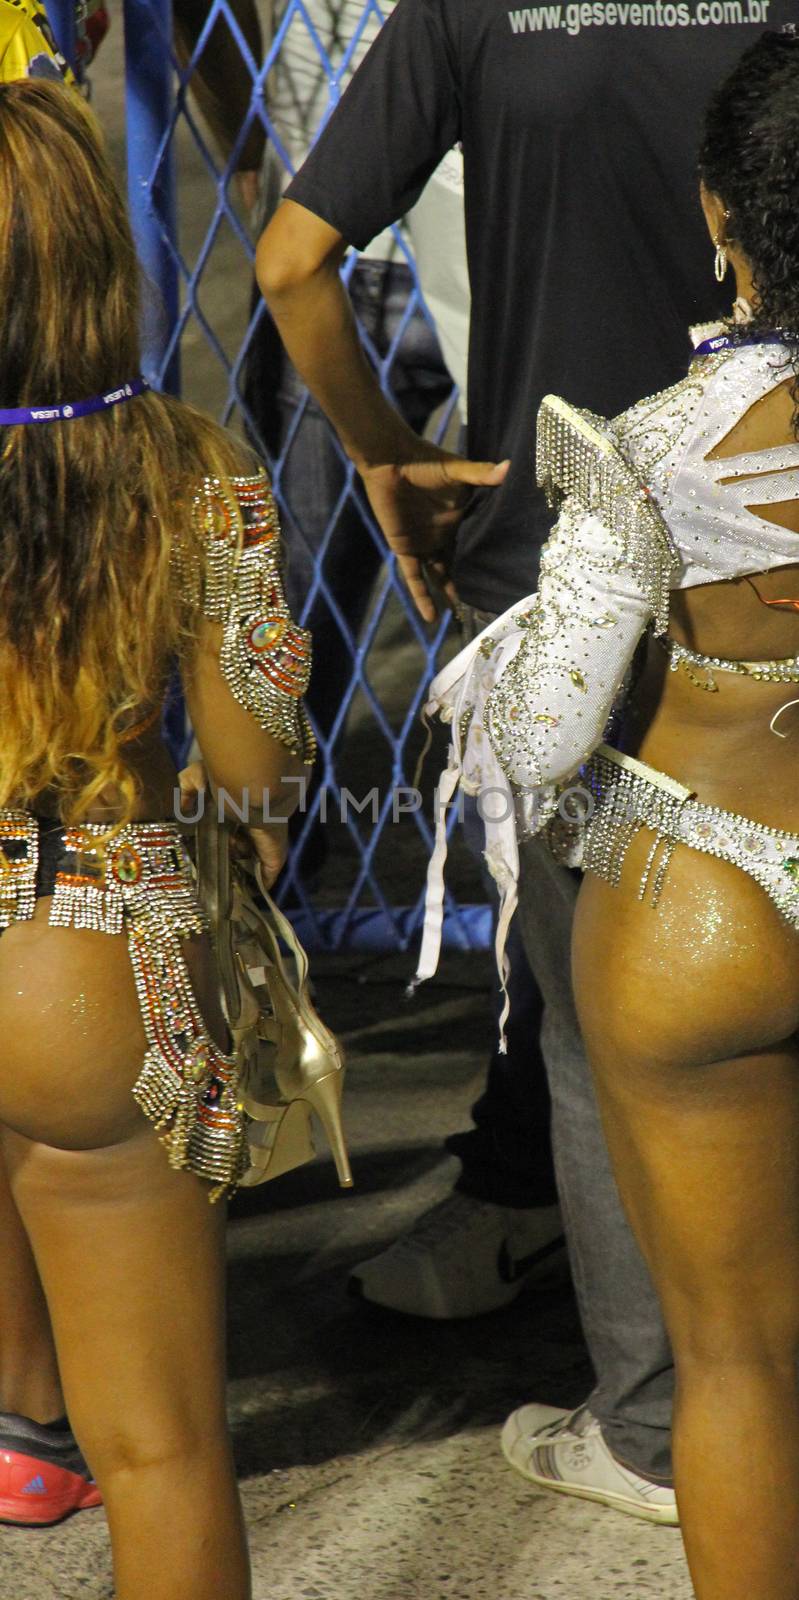 Entertainers at a carnaval in Rio de Janeiro, Brazil
03 Mar 2014
No model release
Editorial only